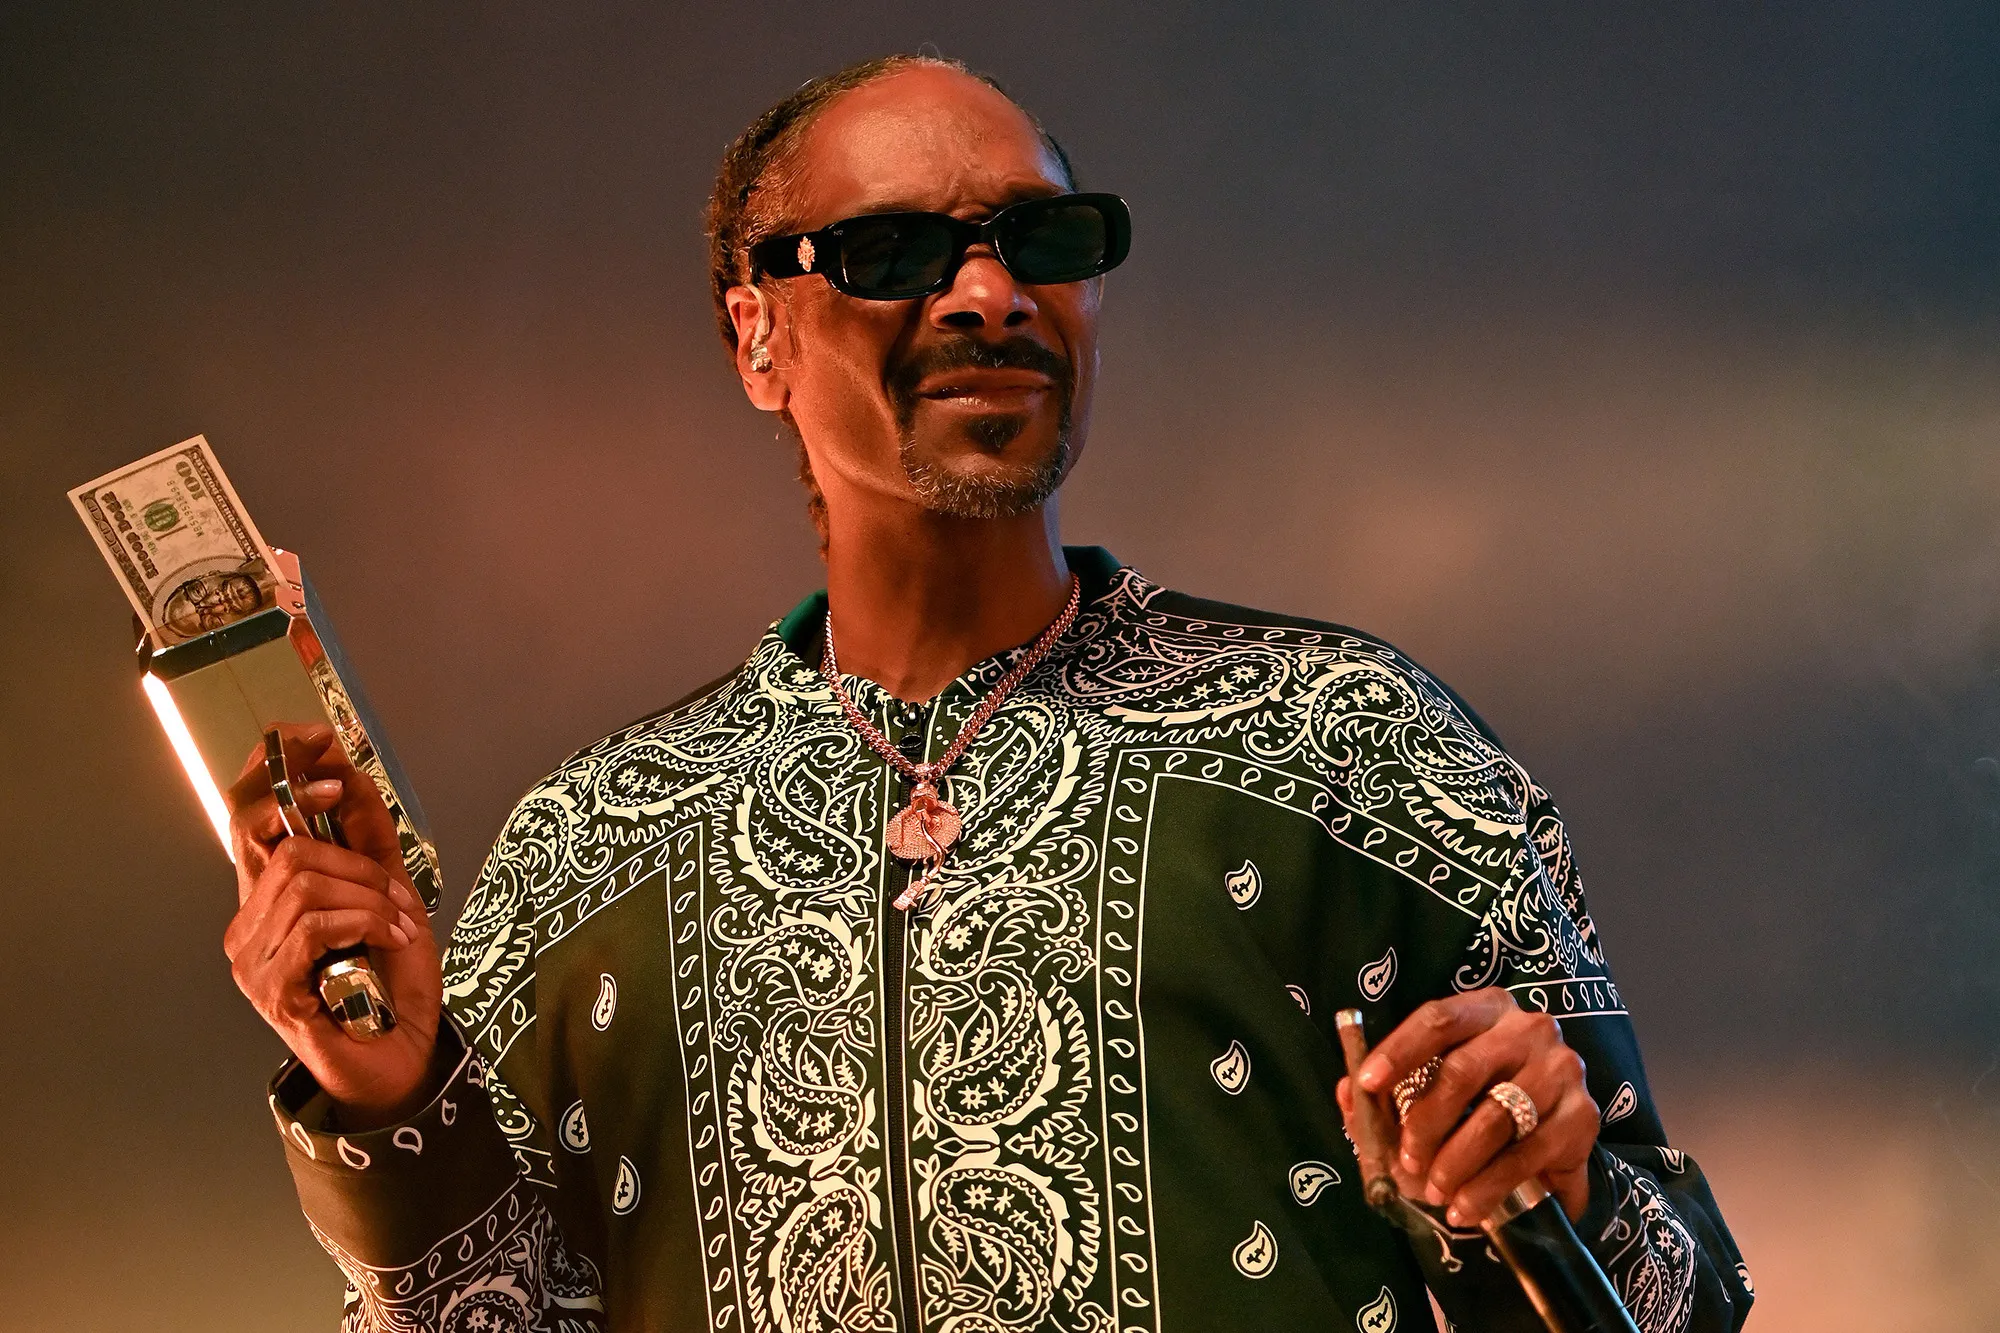 Snoop Dogg Sued Over Alleged Sexual Assault and Battery